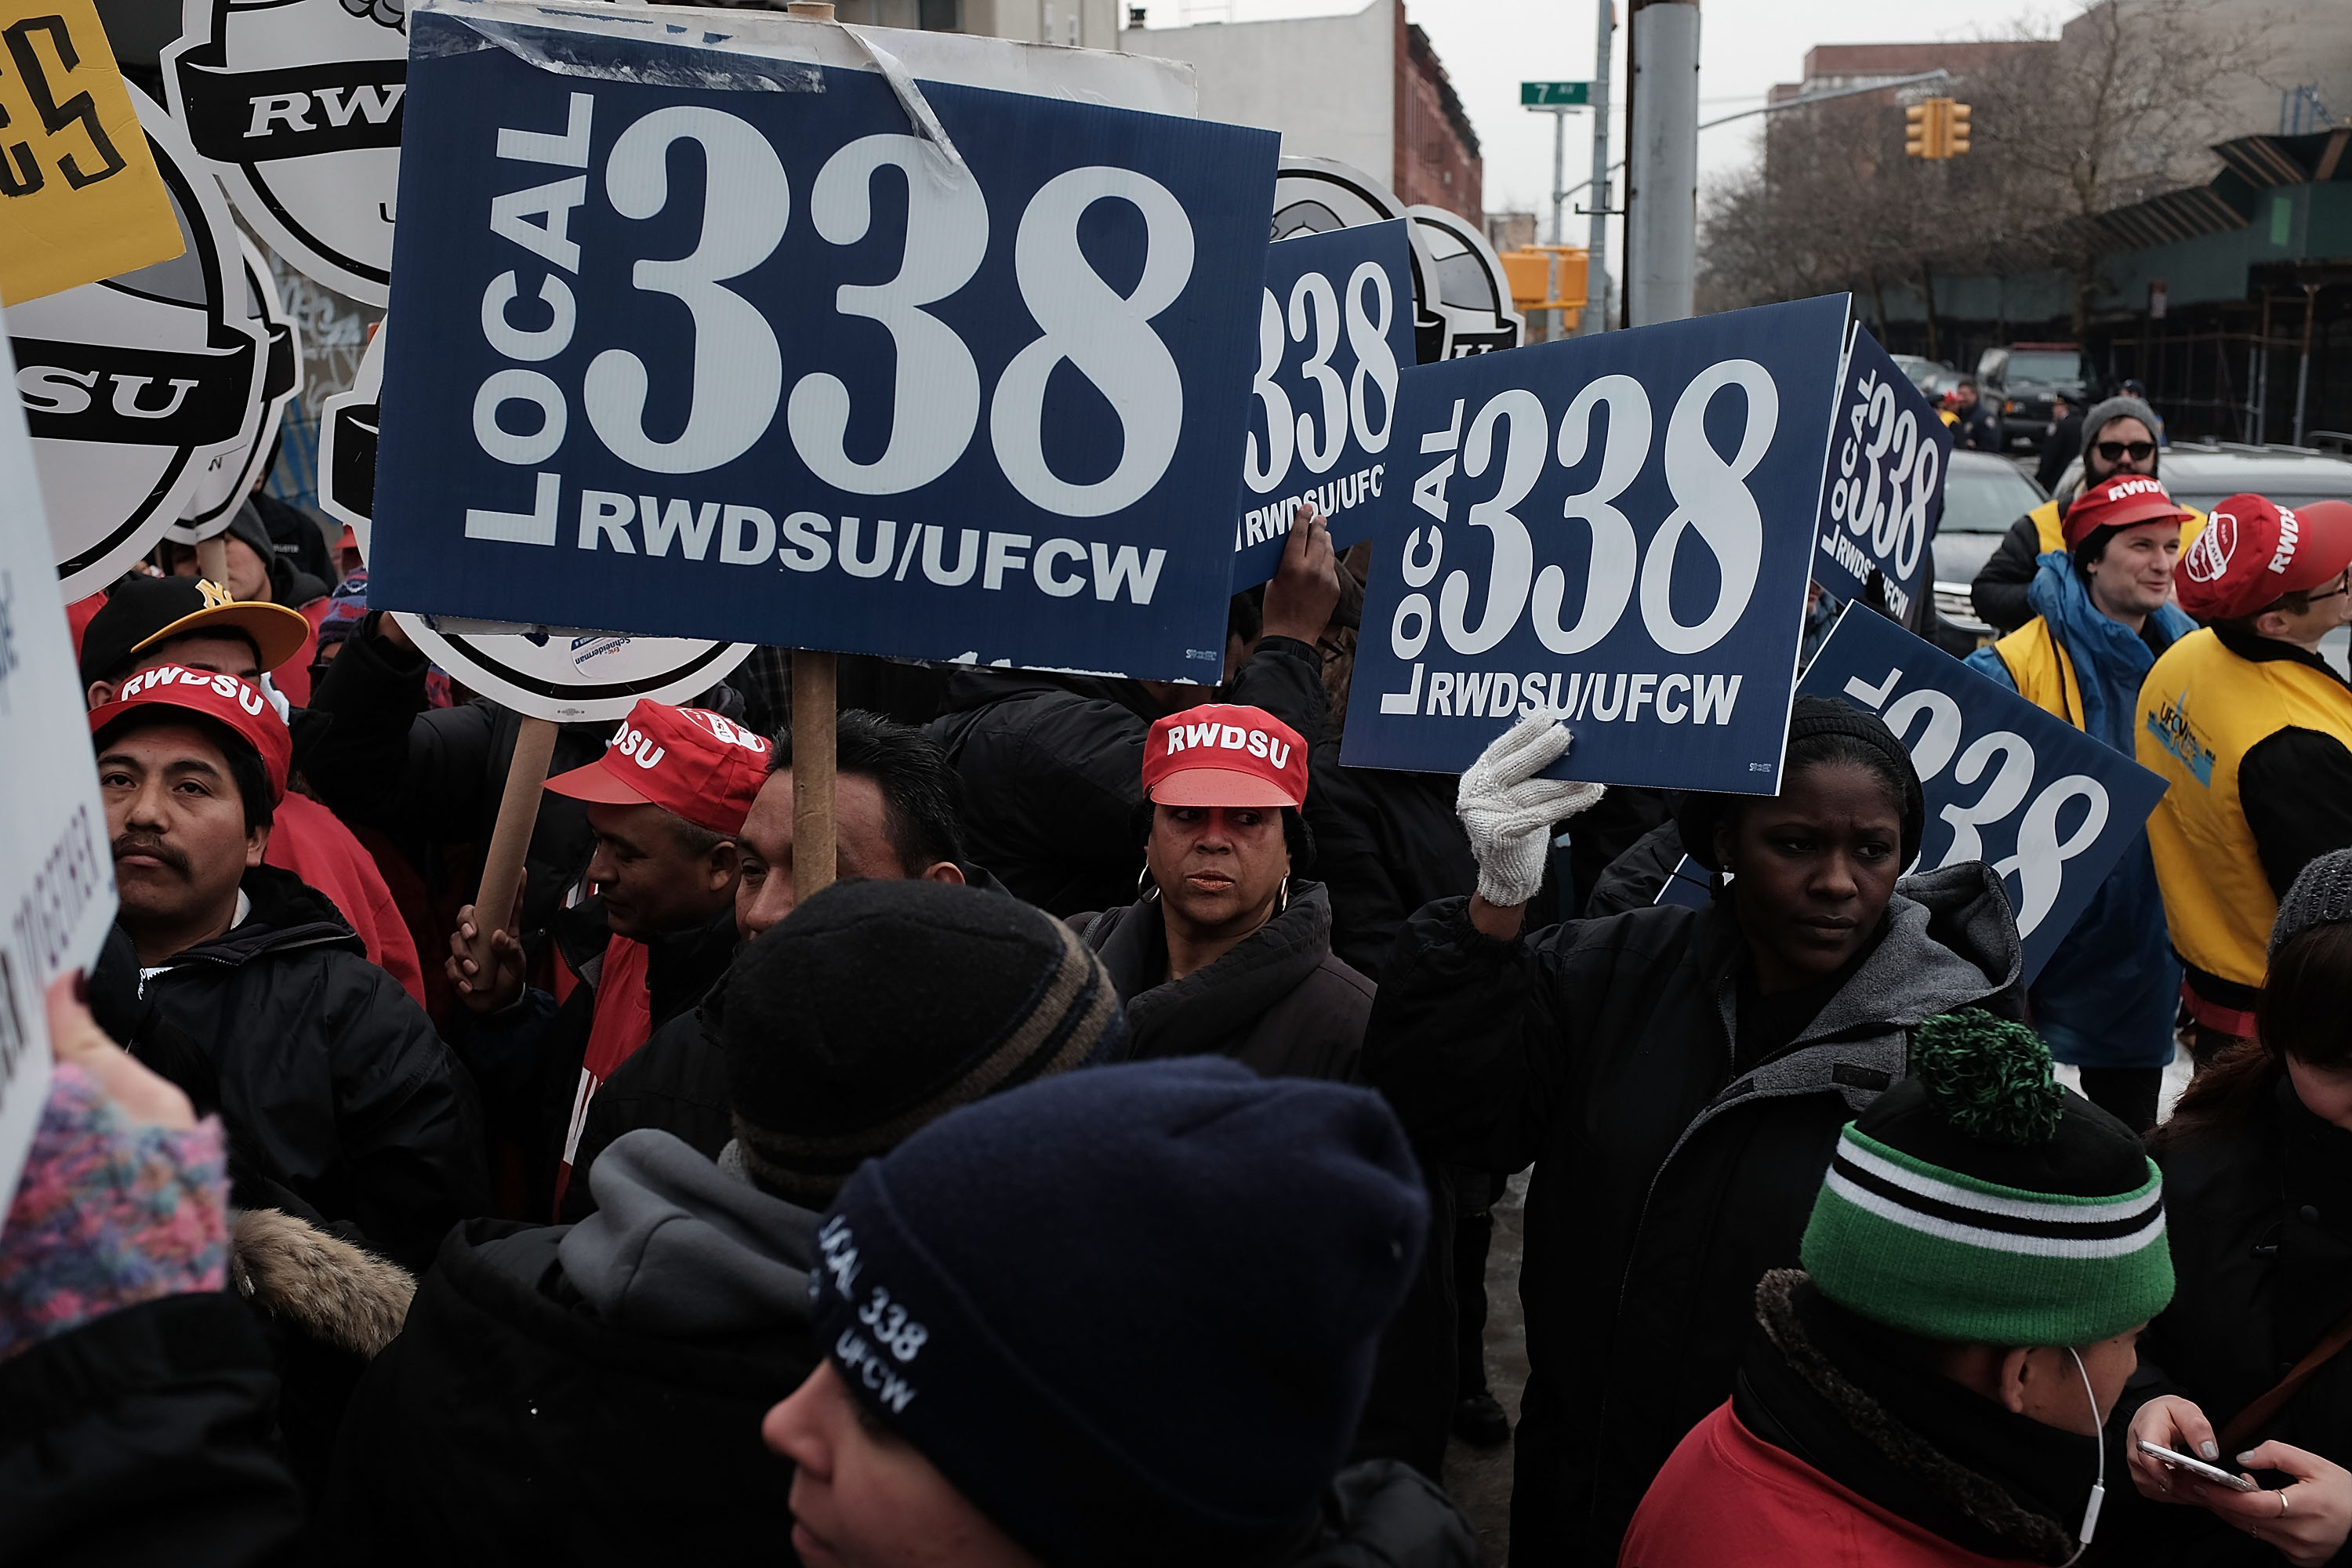 Union workers picketing outside a car wash in Brooklyn. (PHOTO: Spencer Platt/Getty Images)